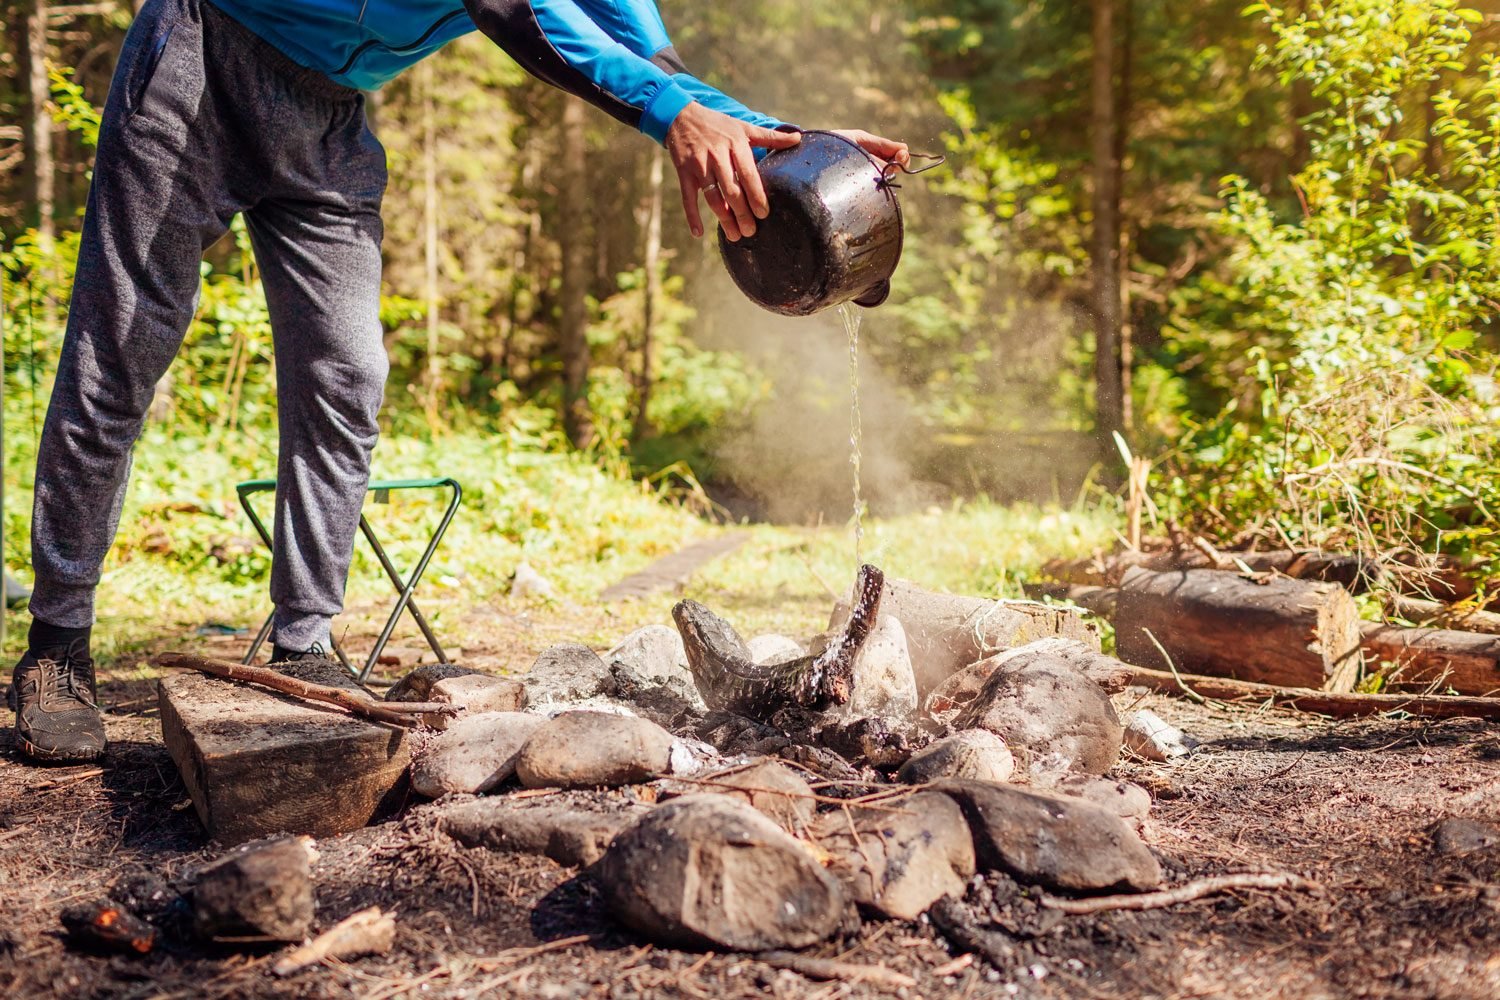 How To Enjoy Campfires and Bonfires Safely